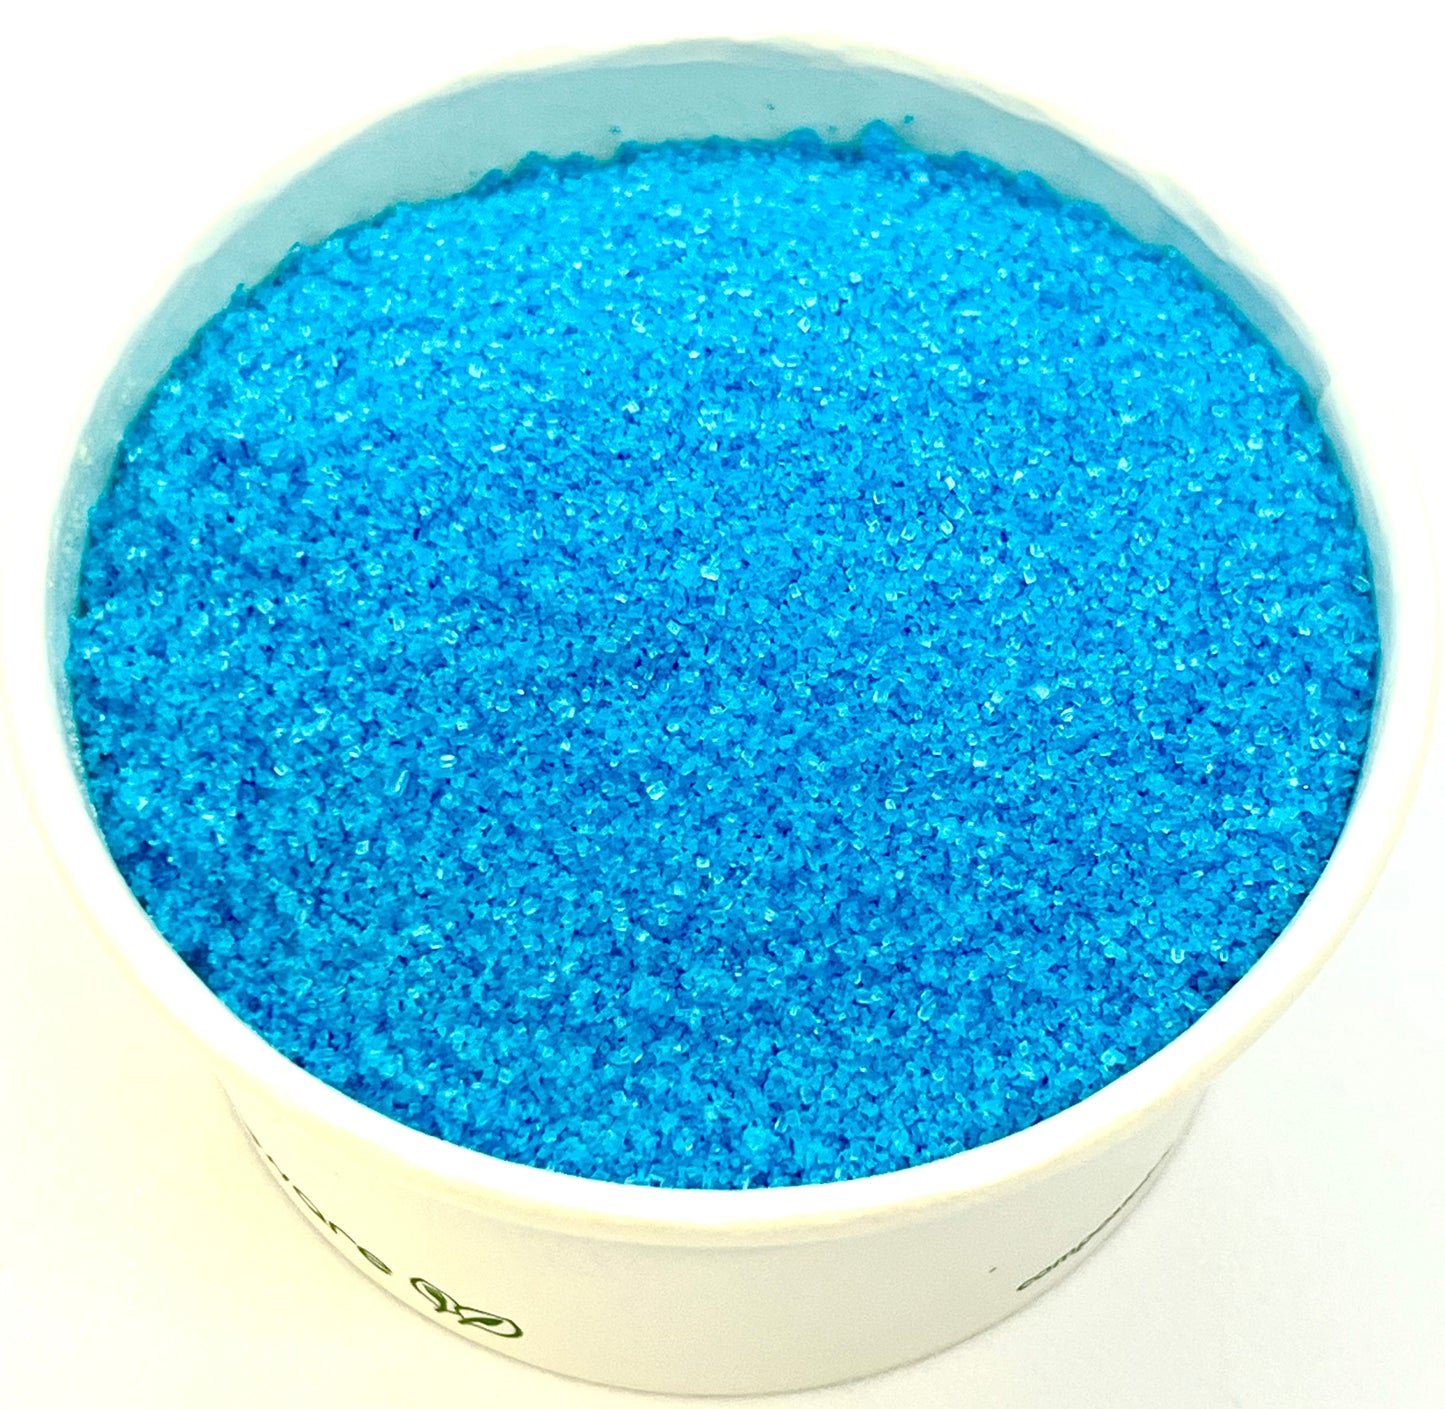 Sour blue raspberry crystals